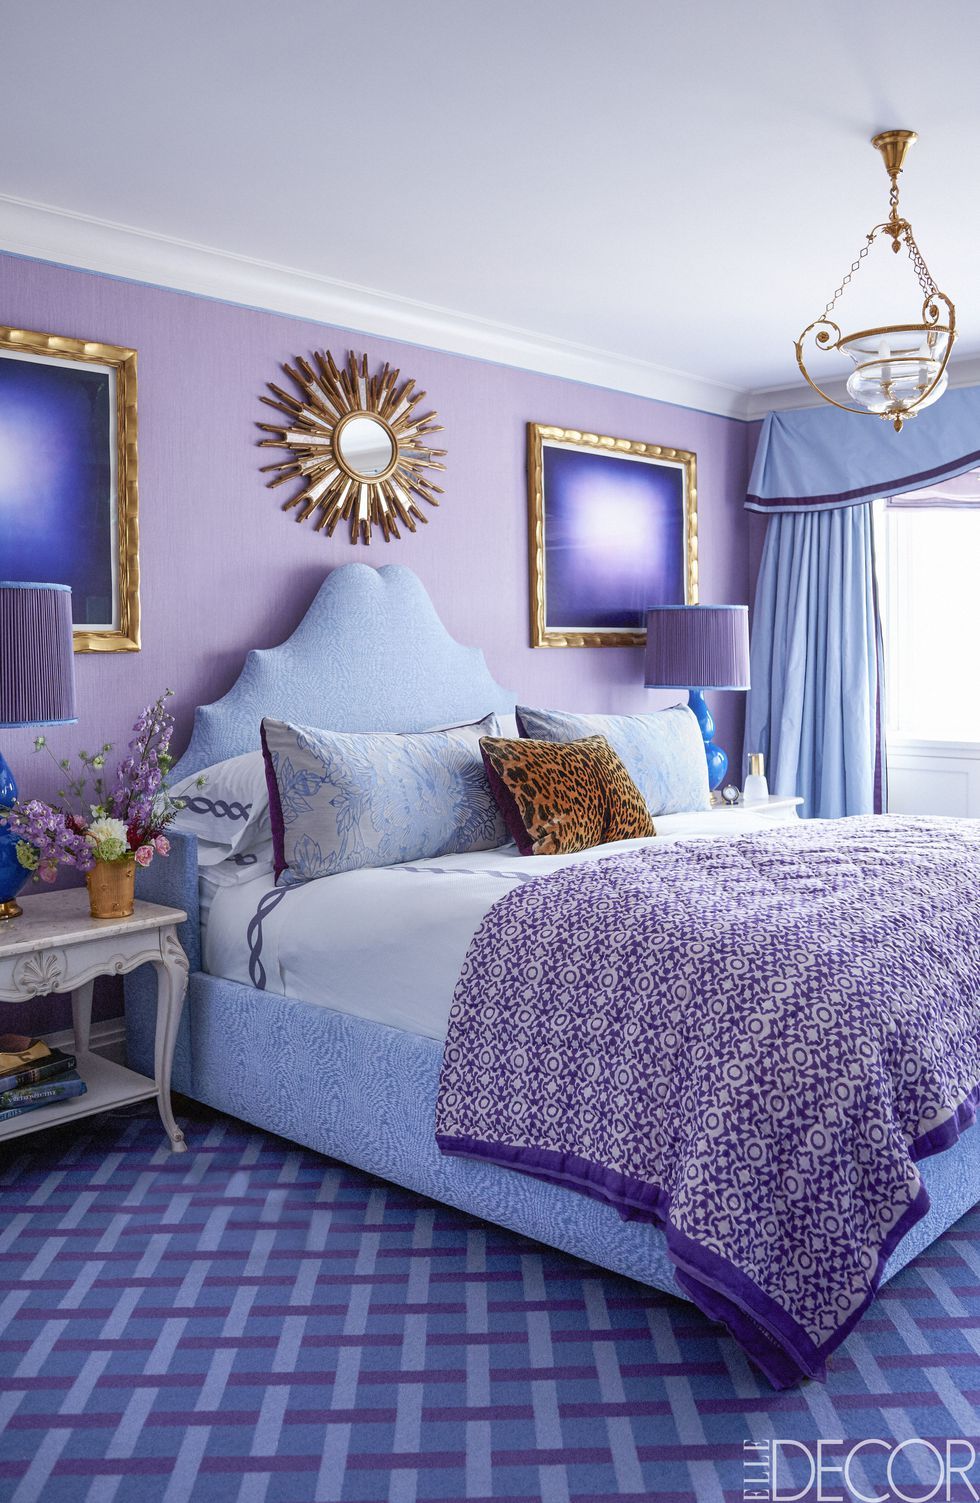 10 Beautiful Plum Color Bedroom Ideas That Will Add A Touch of Elegance ...